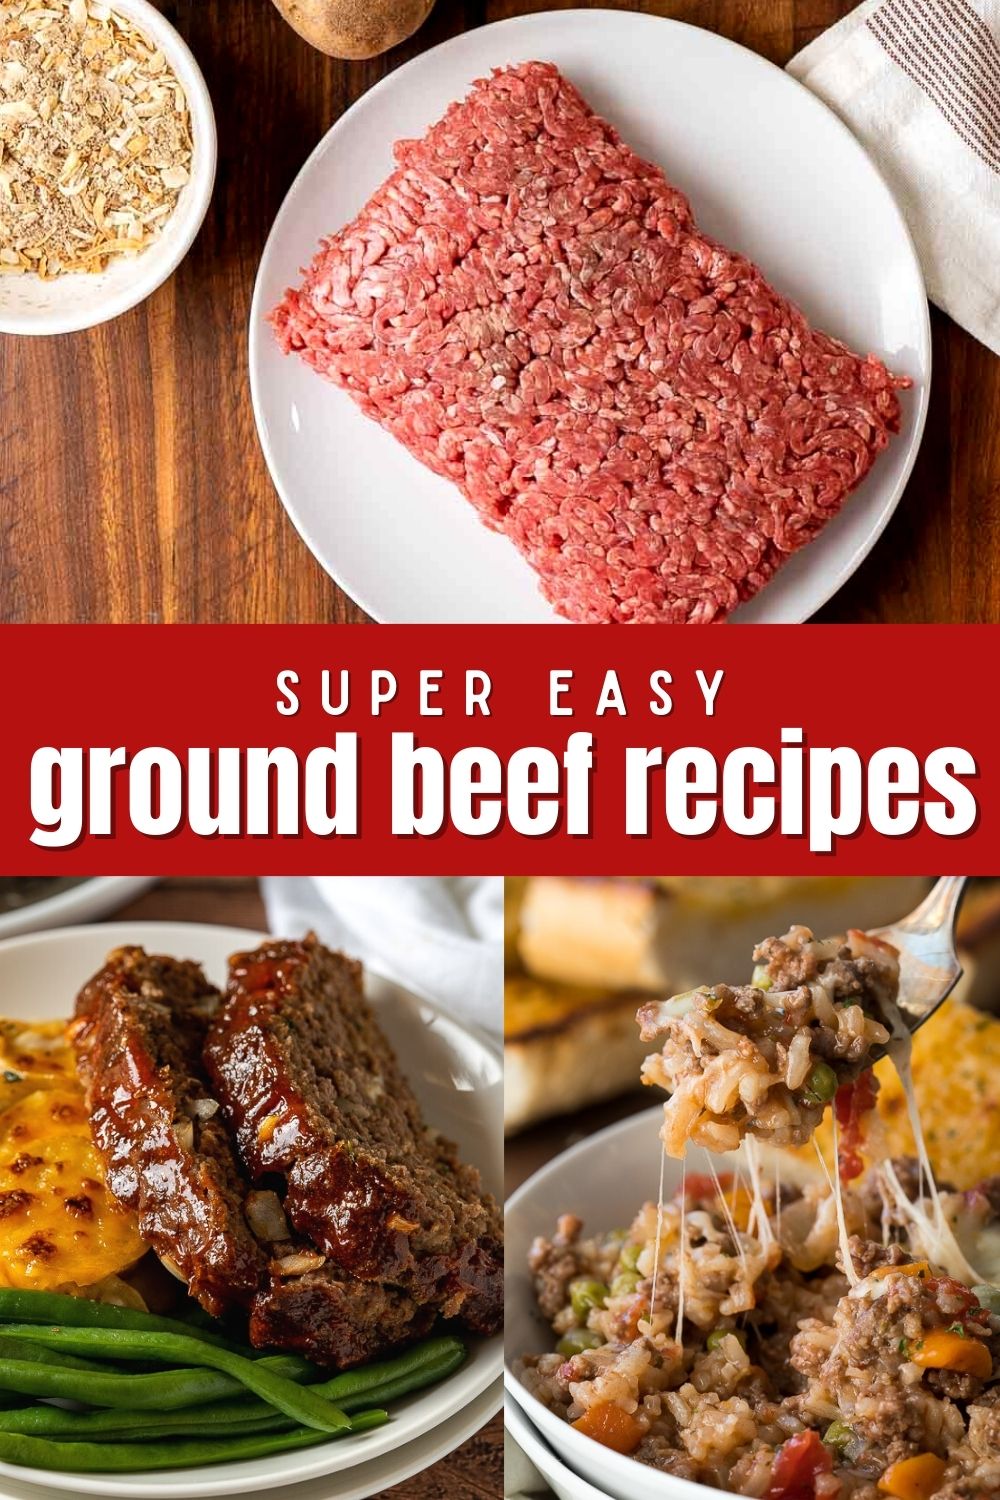 Can You Refreeze Ground Beef?